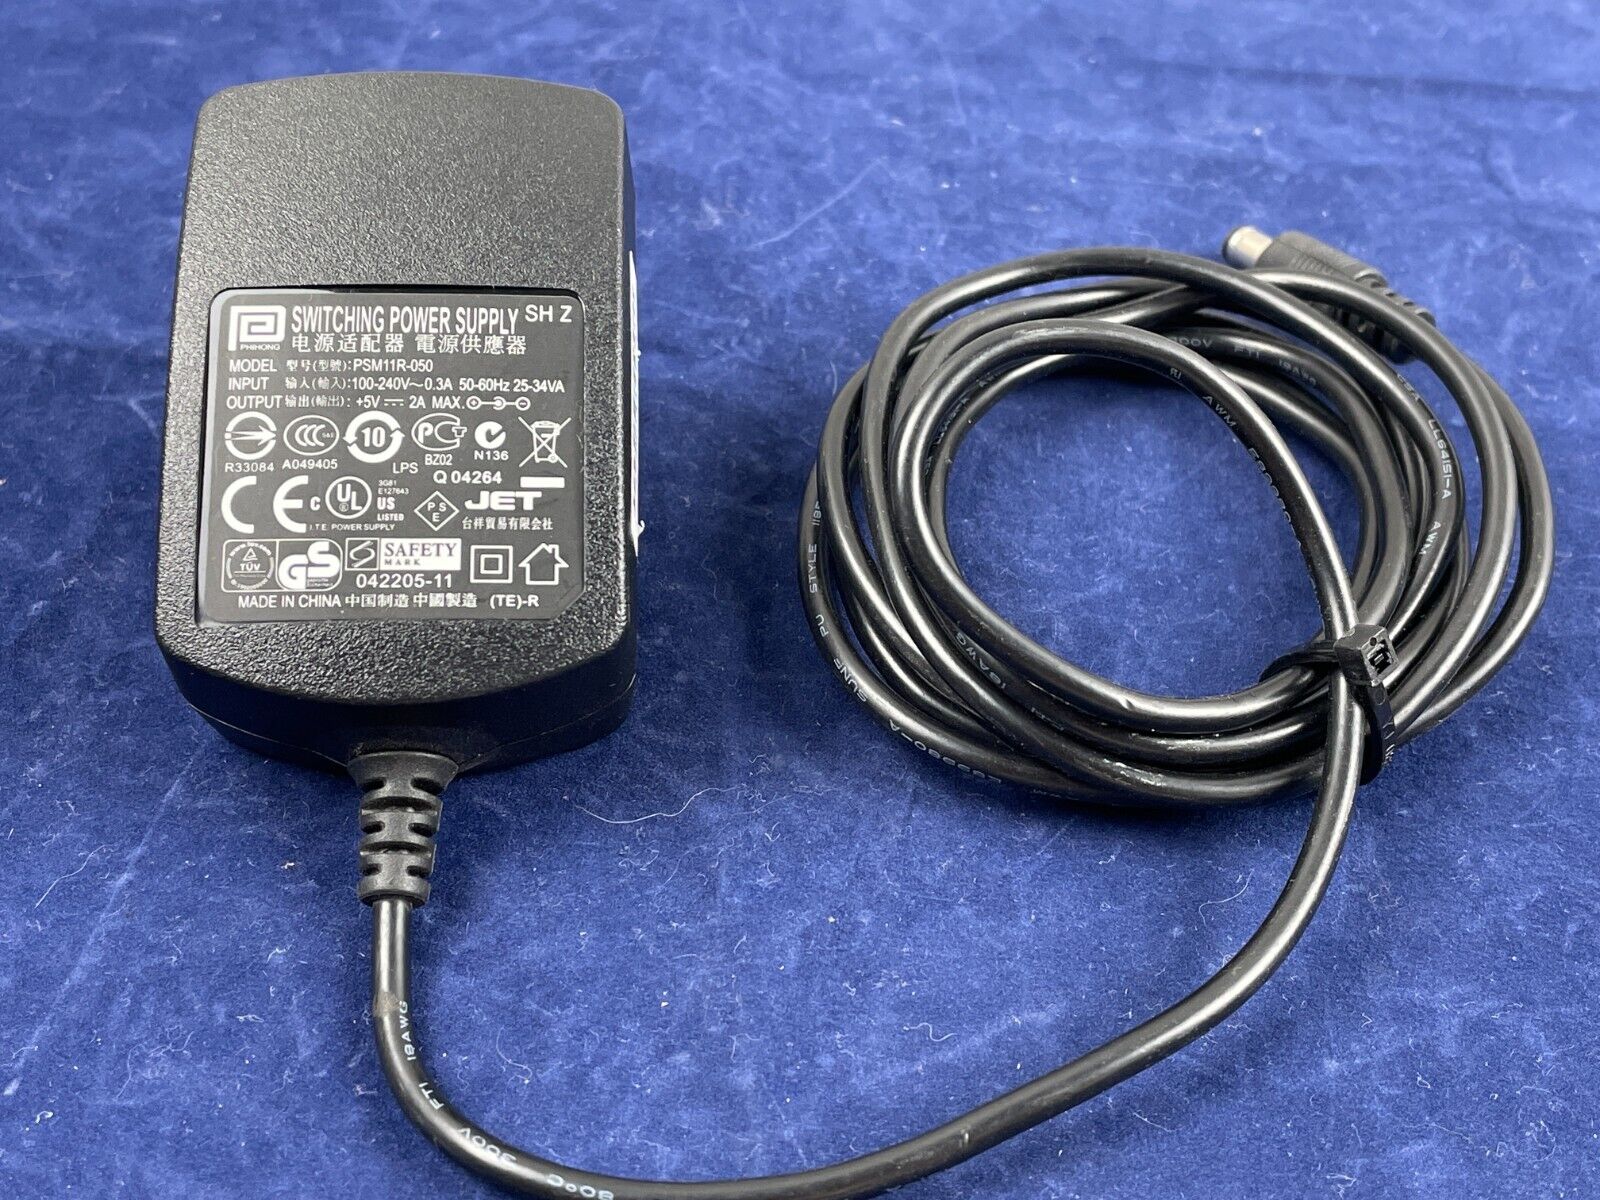 PHIHONG PSM11R-050 100-240V SWITCHING 5V 2A AC POWER SUPPLY ADAPTER 5.5 x 2.5MM Type: AC/DC Adapter MPN: PSM11R-050 - Click Image to Close